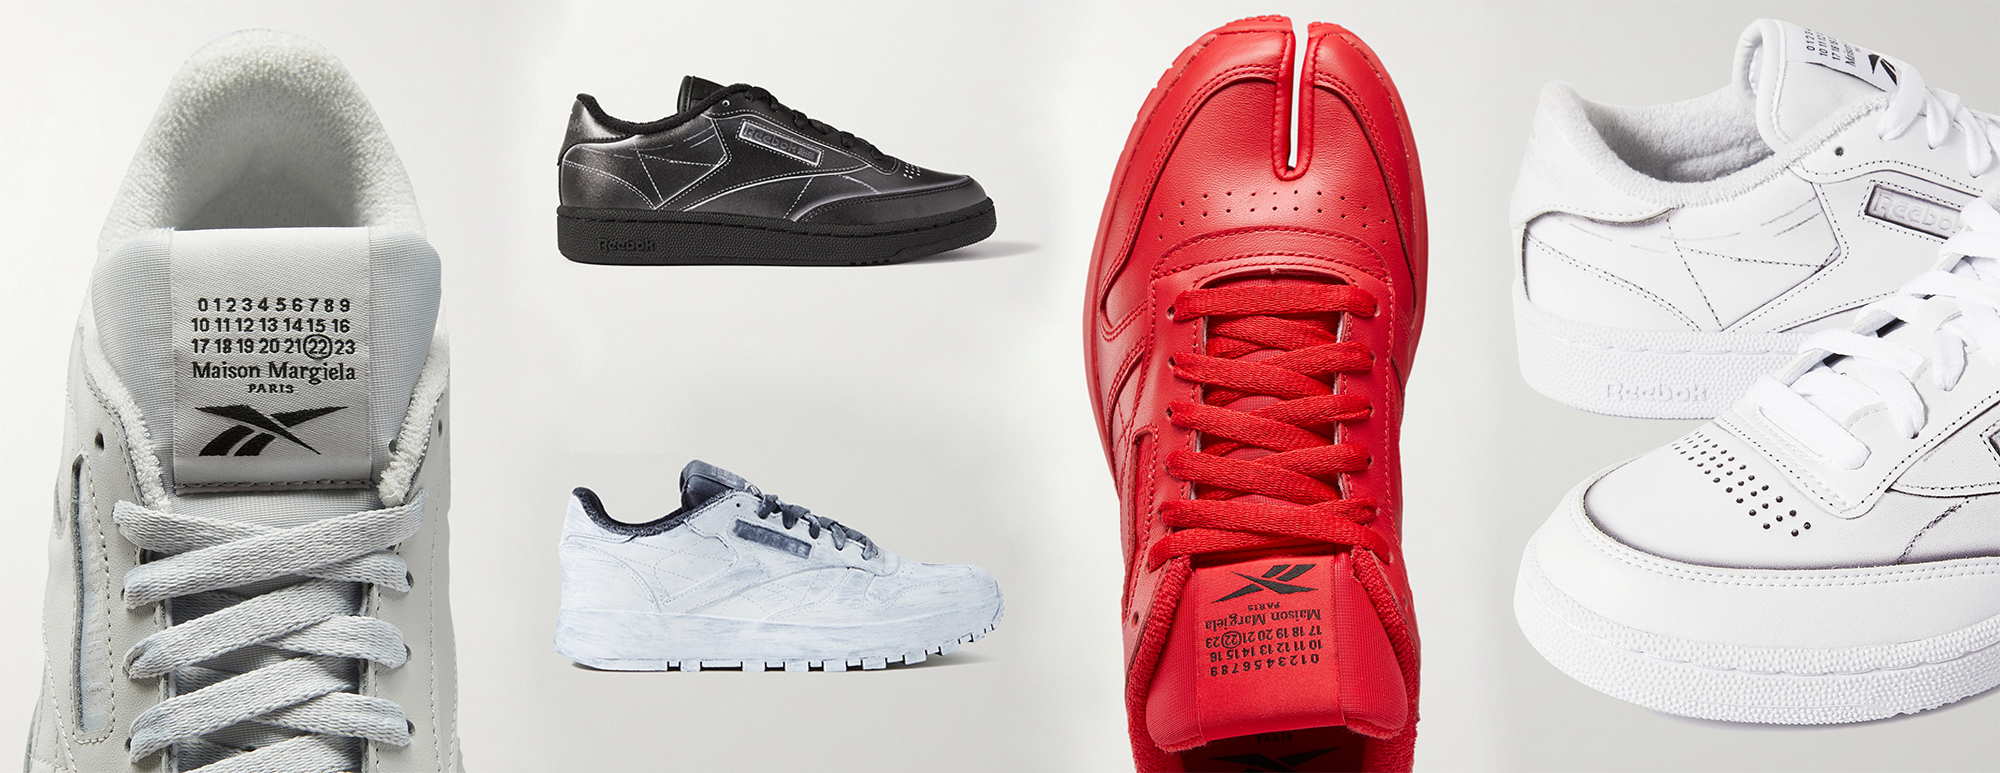 More designs from the Reebok x Margiela collaboration on NET-A-PORTER